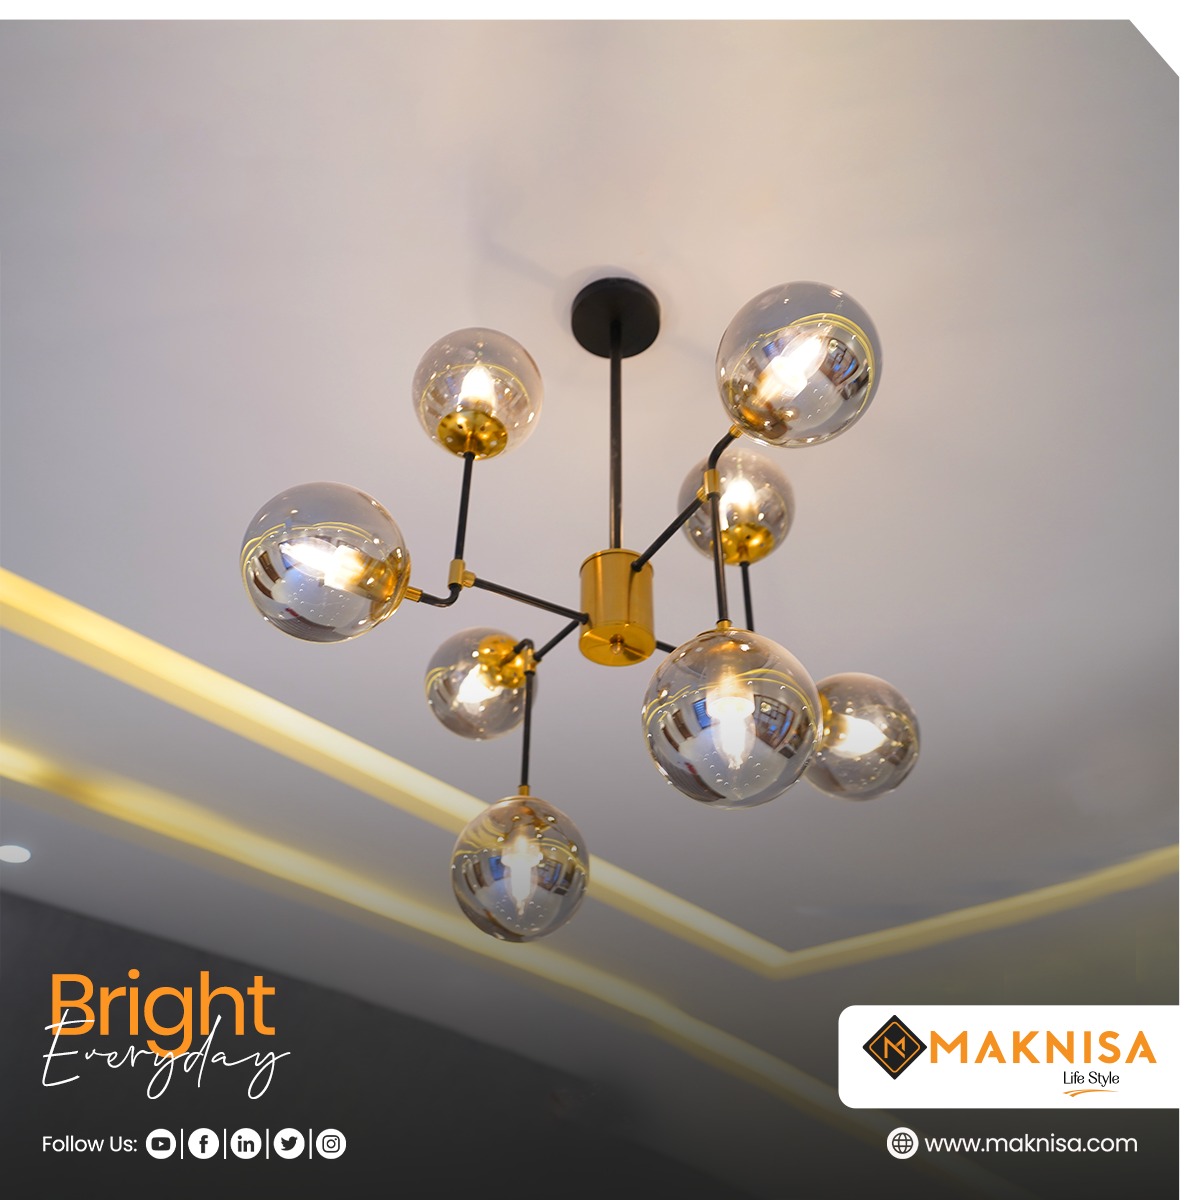 Indulge in luxury and create a mesmerizing ambiance with exquisite chandeliers ✨✨

#maknisa #interiordesign #interiors #ceilings #design #ceilingdecor #lighting #lookingup #ceilinglight #ceilingfan #homedesign #ventilation #chandelier